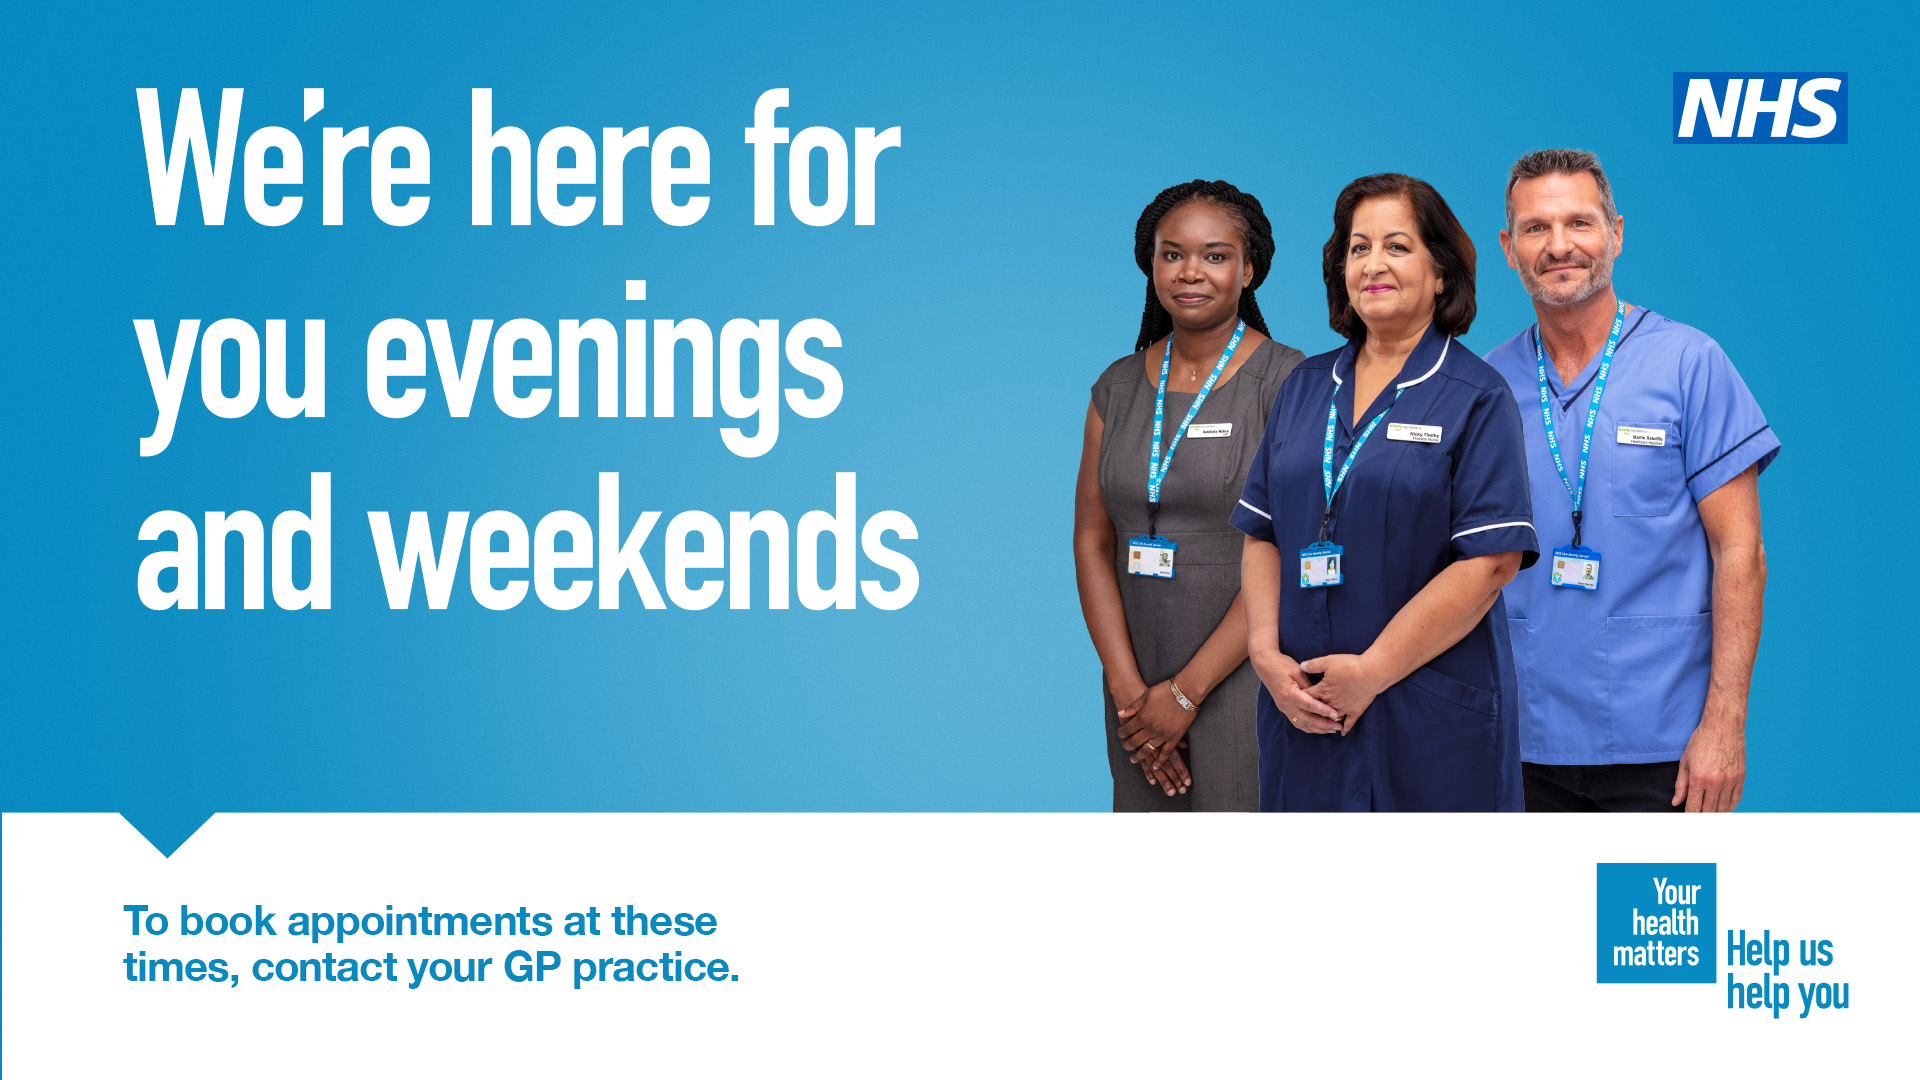 Poster - contact practice for evening and weekend appointments